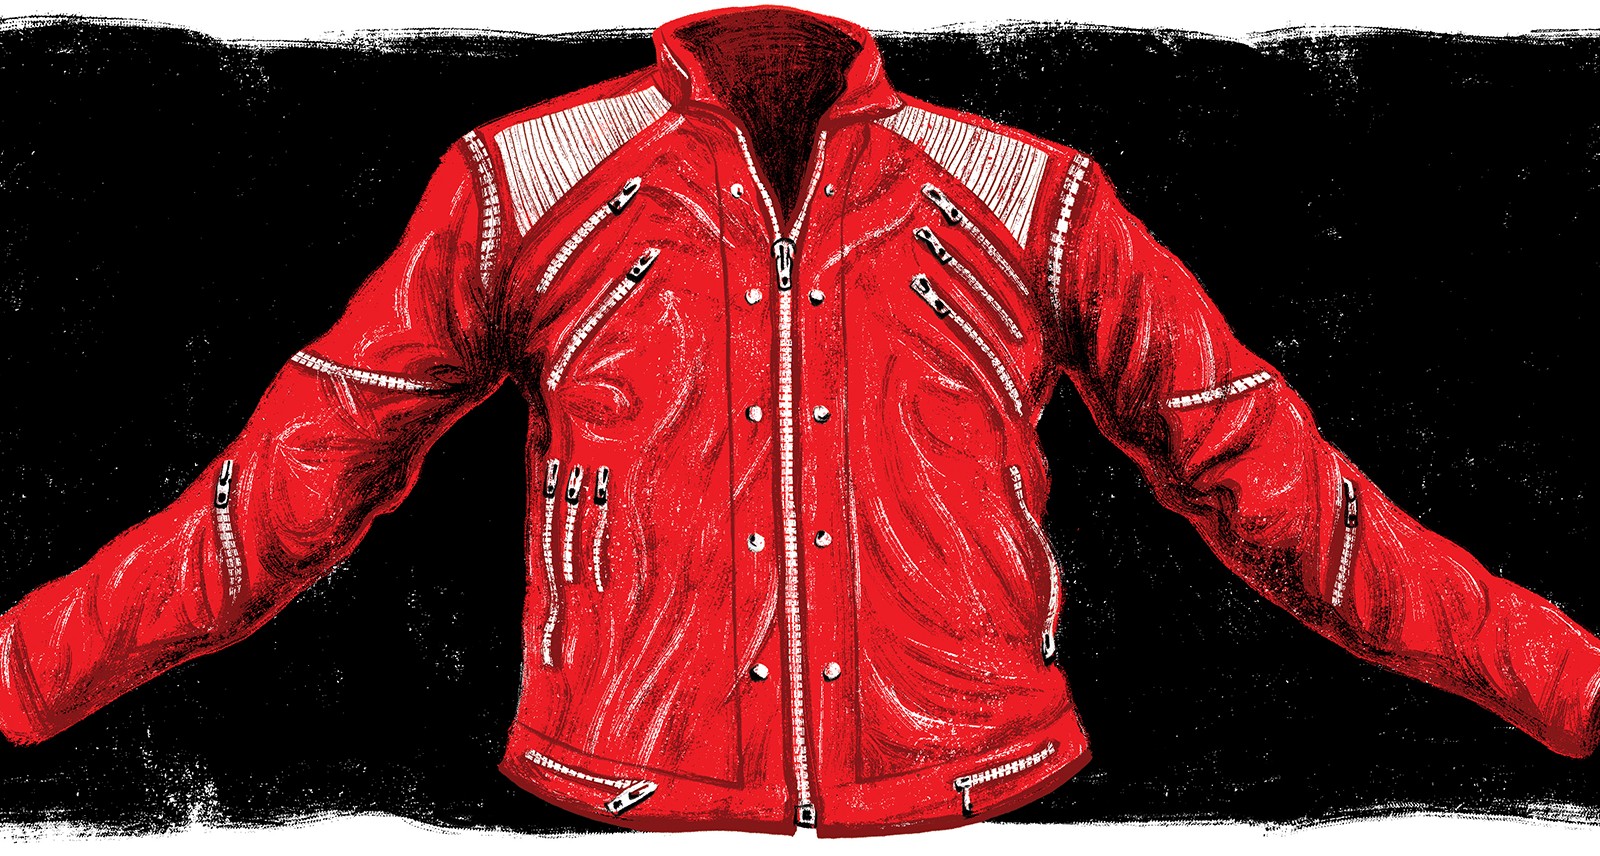 I Bought a Michael Jackson Jacket as a Kid and It Nearly Ruined Me